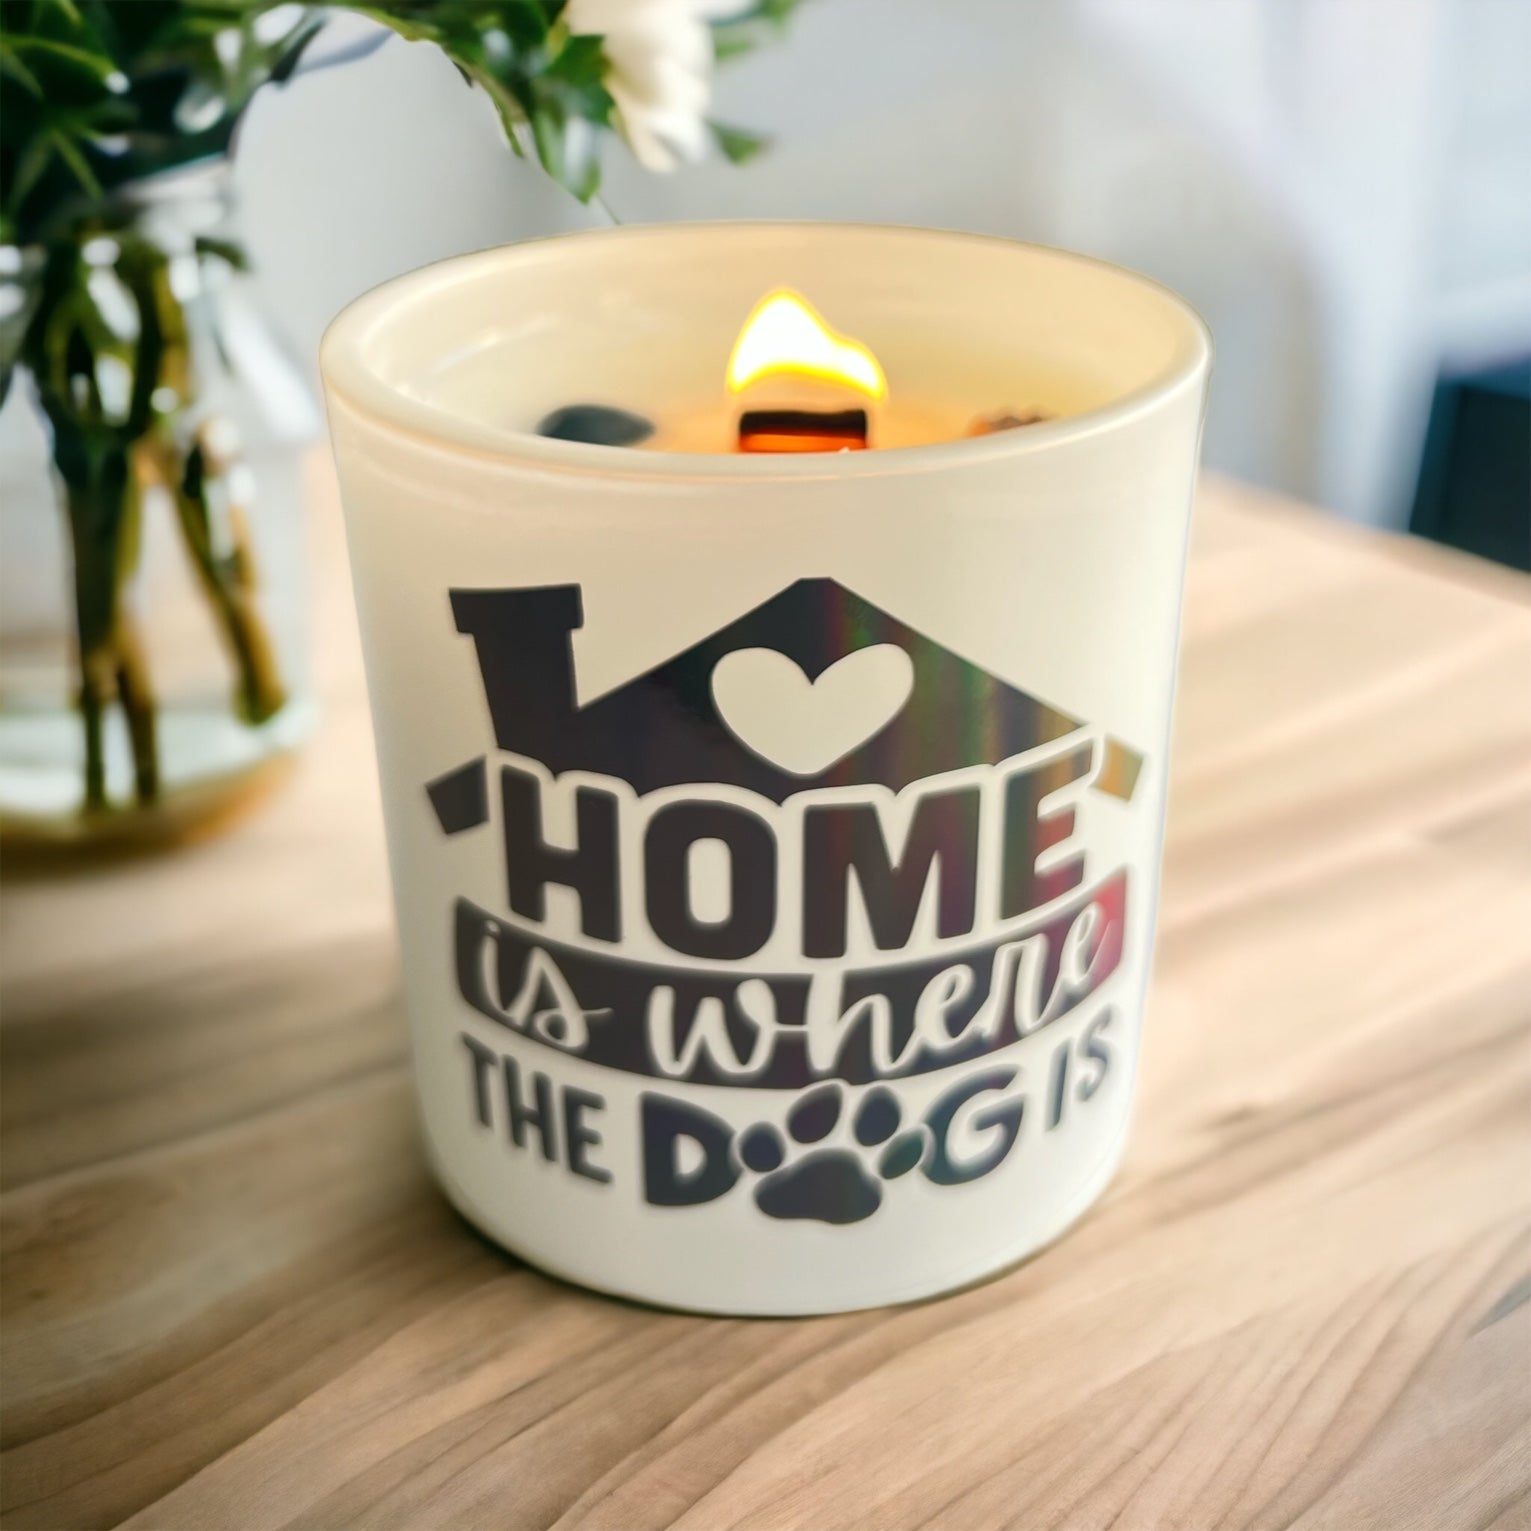 Home is where the dog is Candle